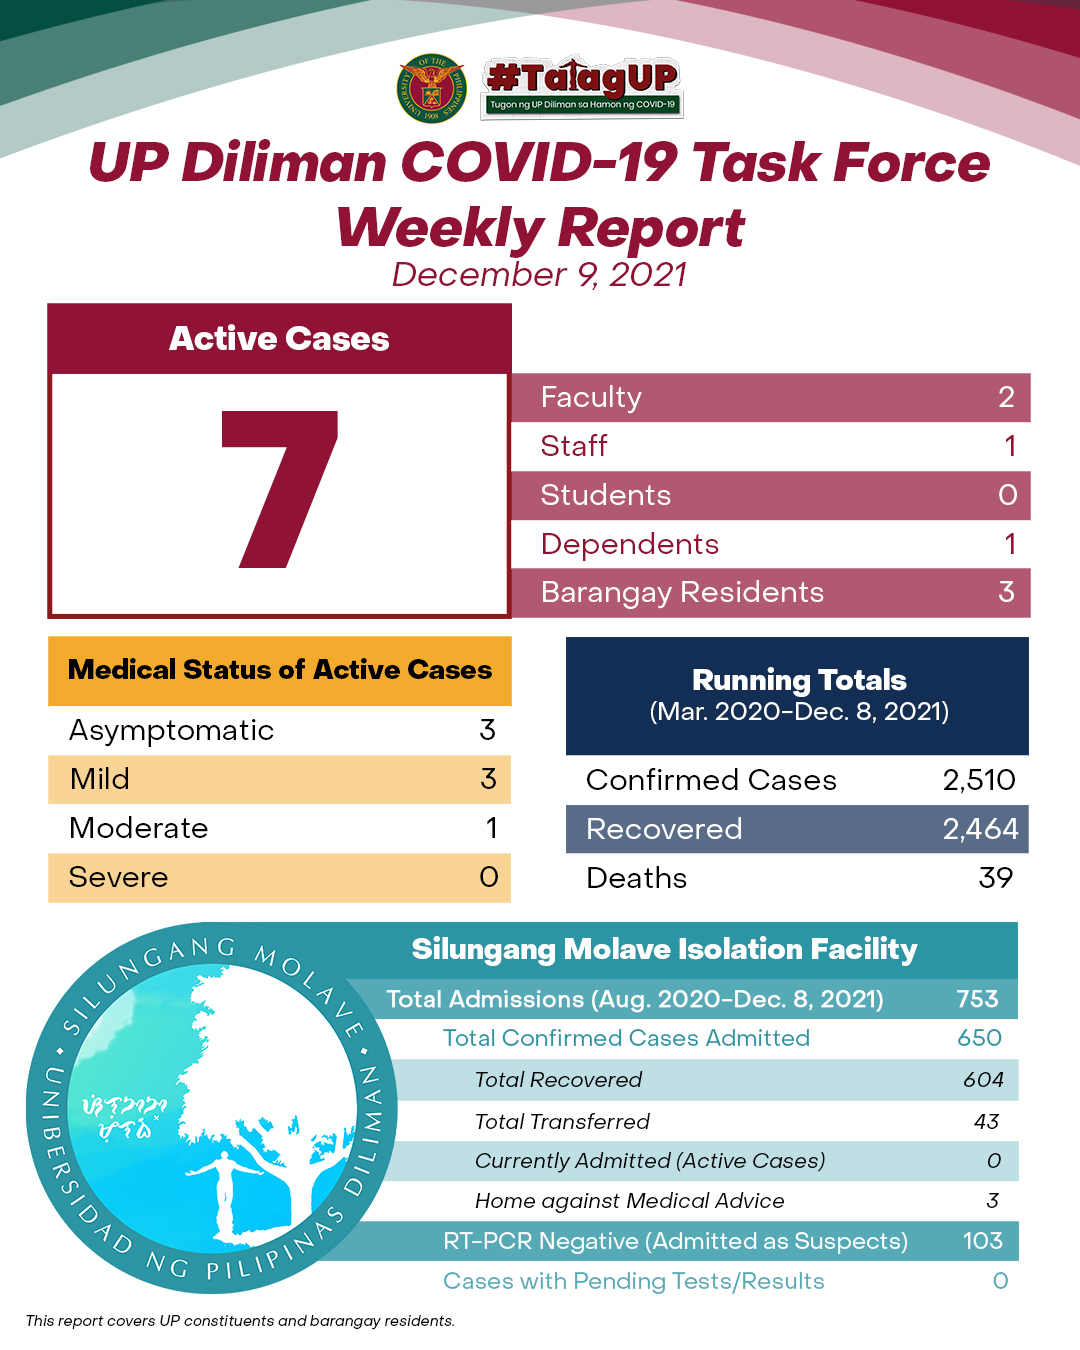 UP Diliman COVID-19 Task Force Weekly Report (December 9, 2021)